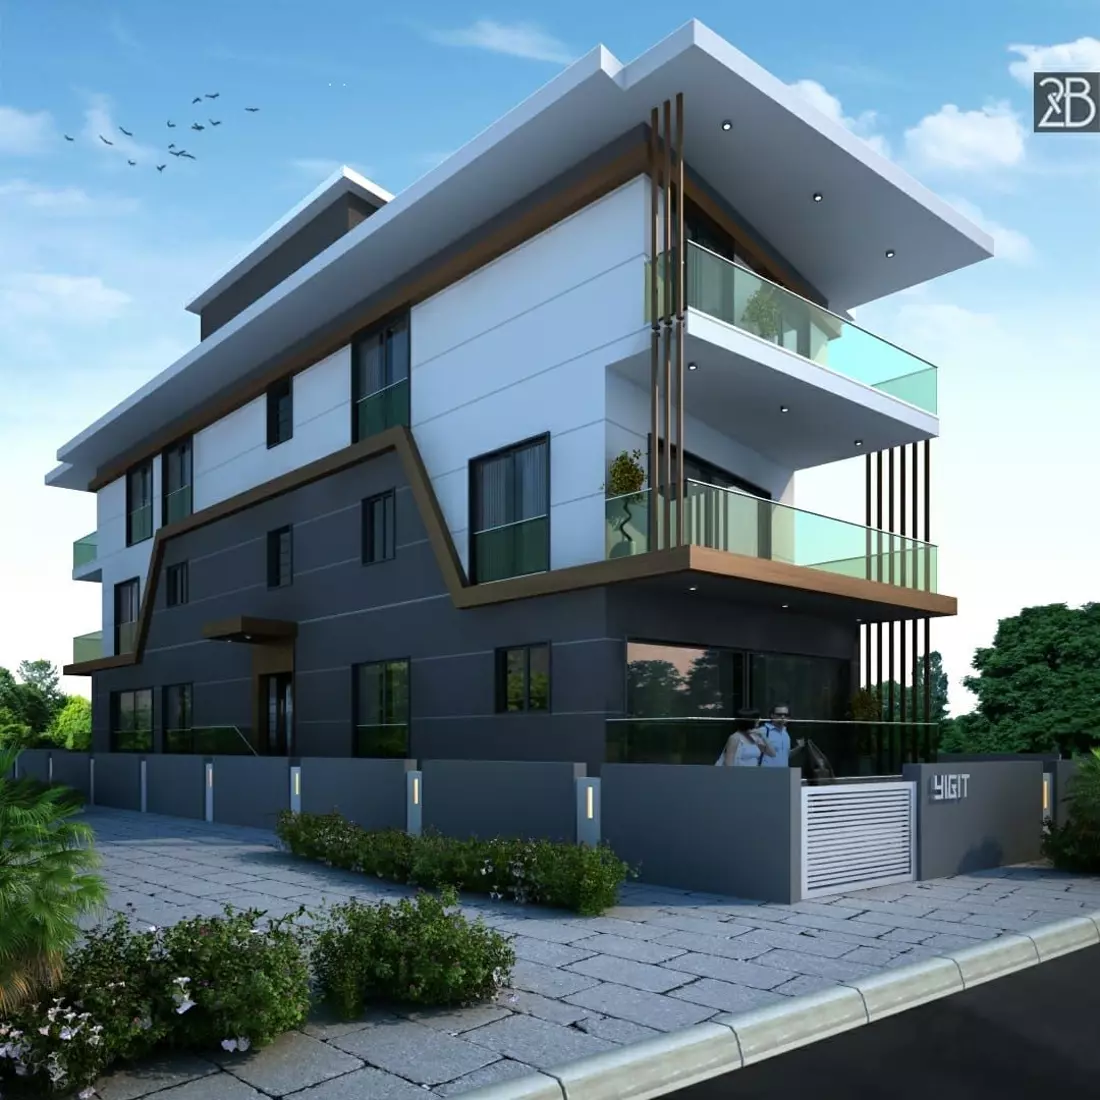 New 2 bedroom smart apartment project at the center of Marmaris.